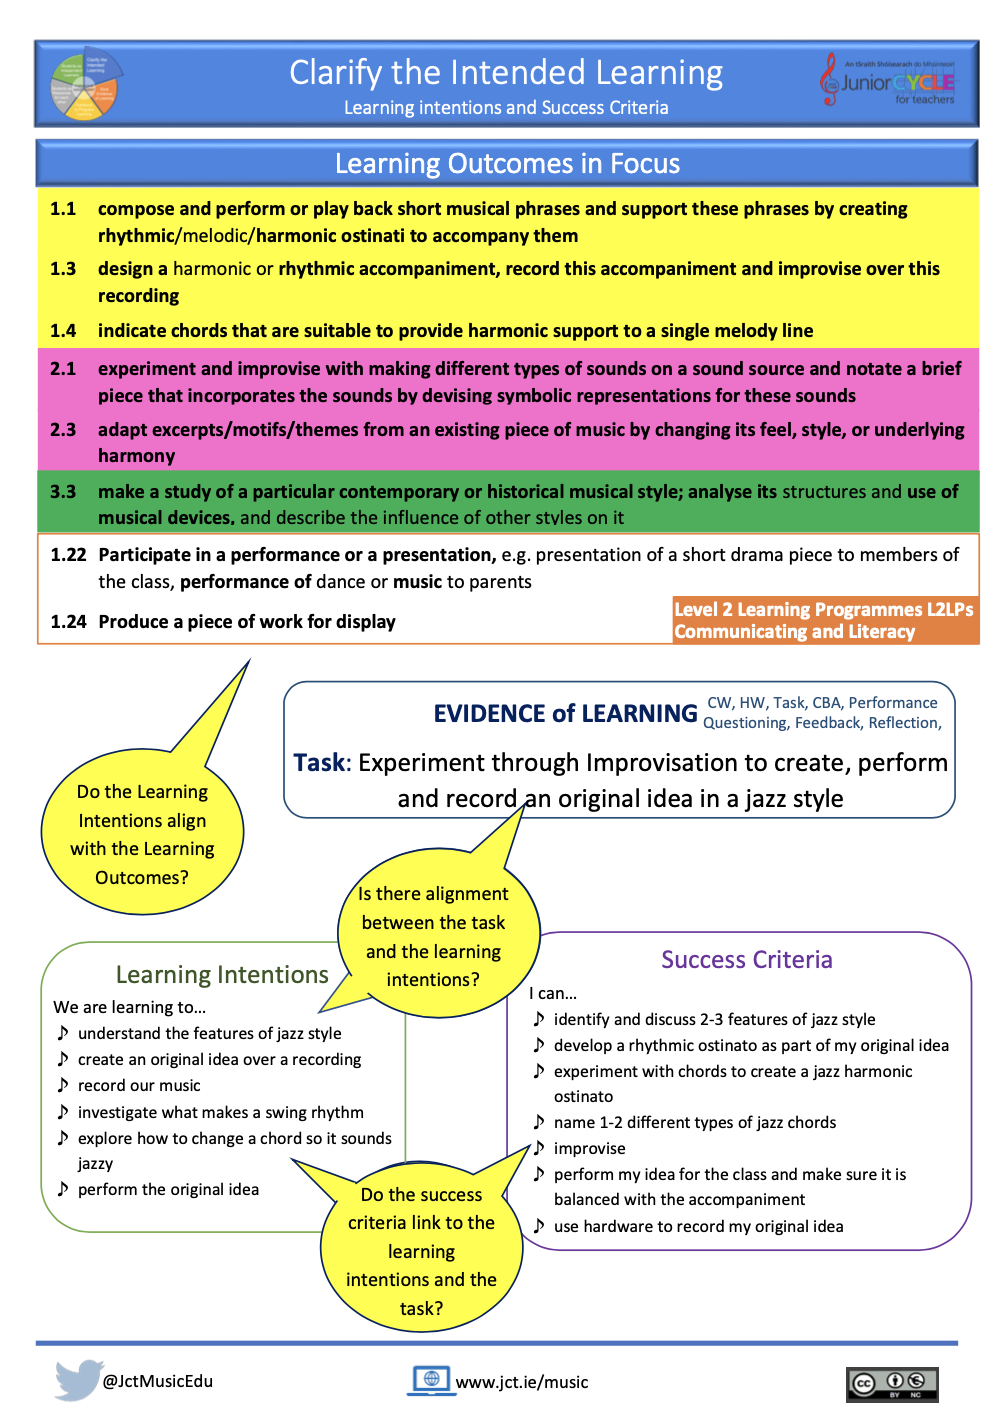 Clarifying the intended learning - Learning Outcomes and Success Criteria